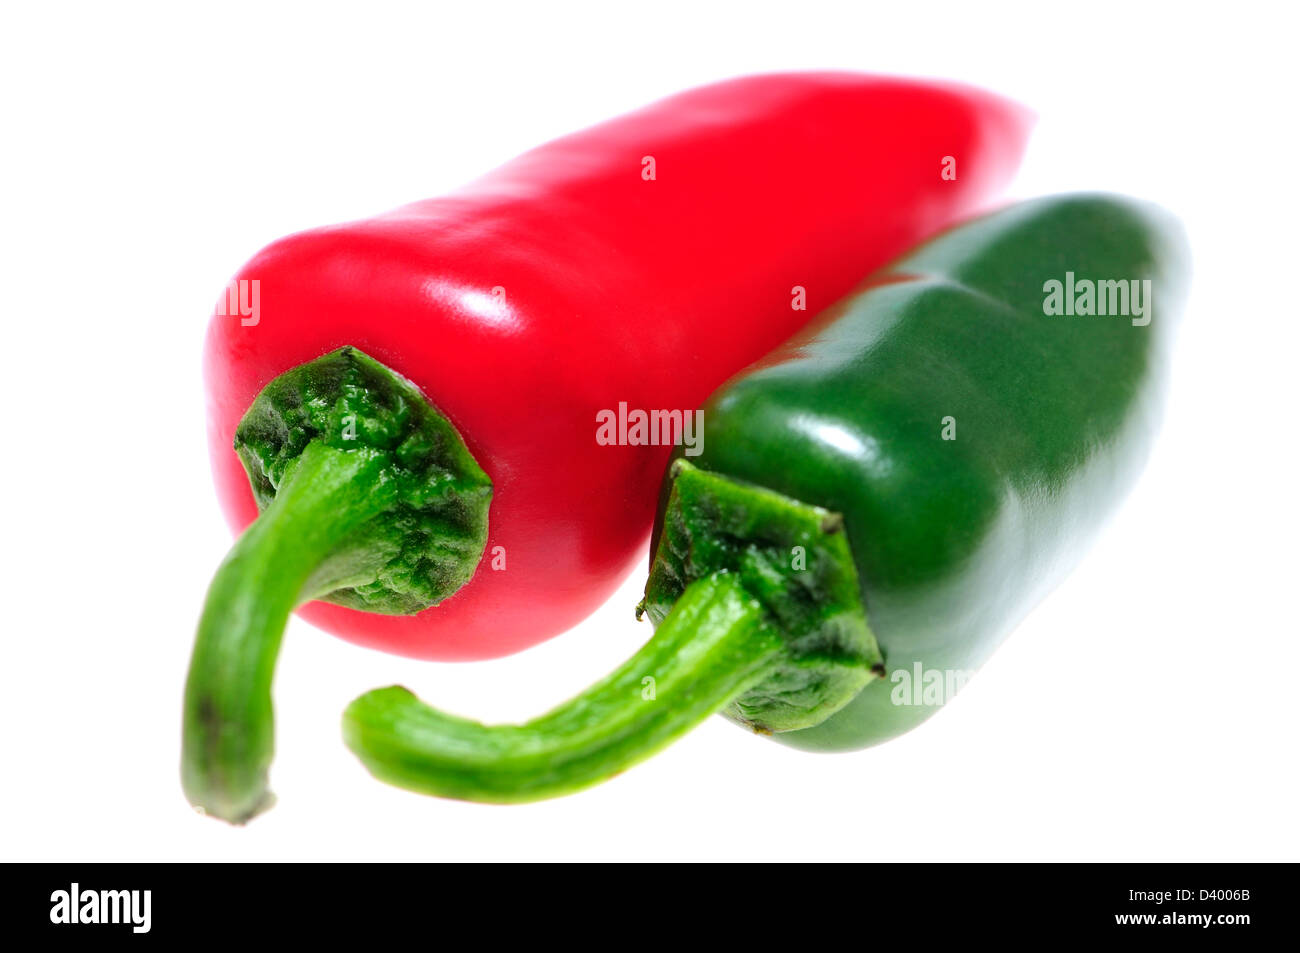 Small red and green chili peppers Stock Photo